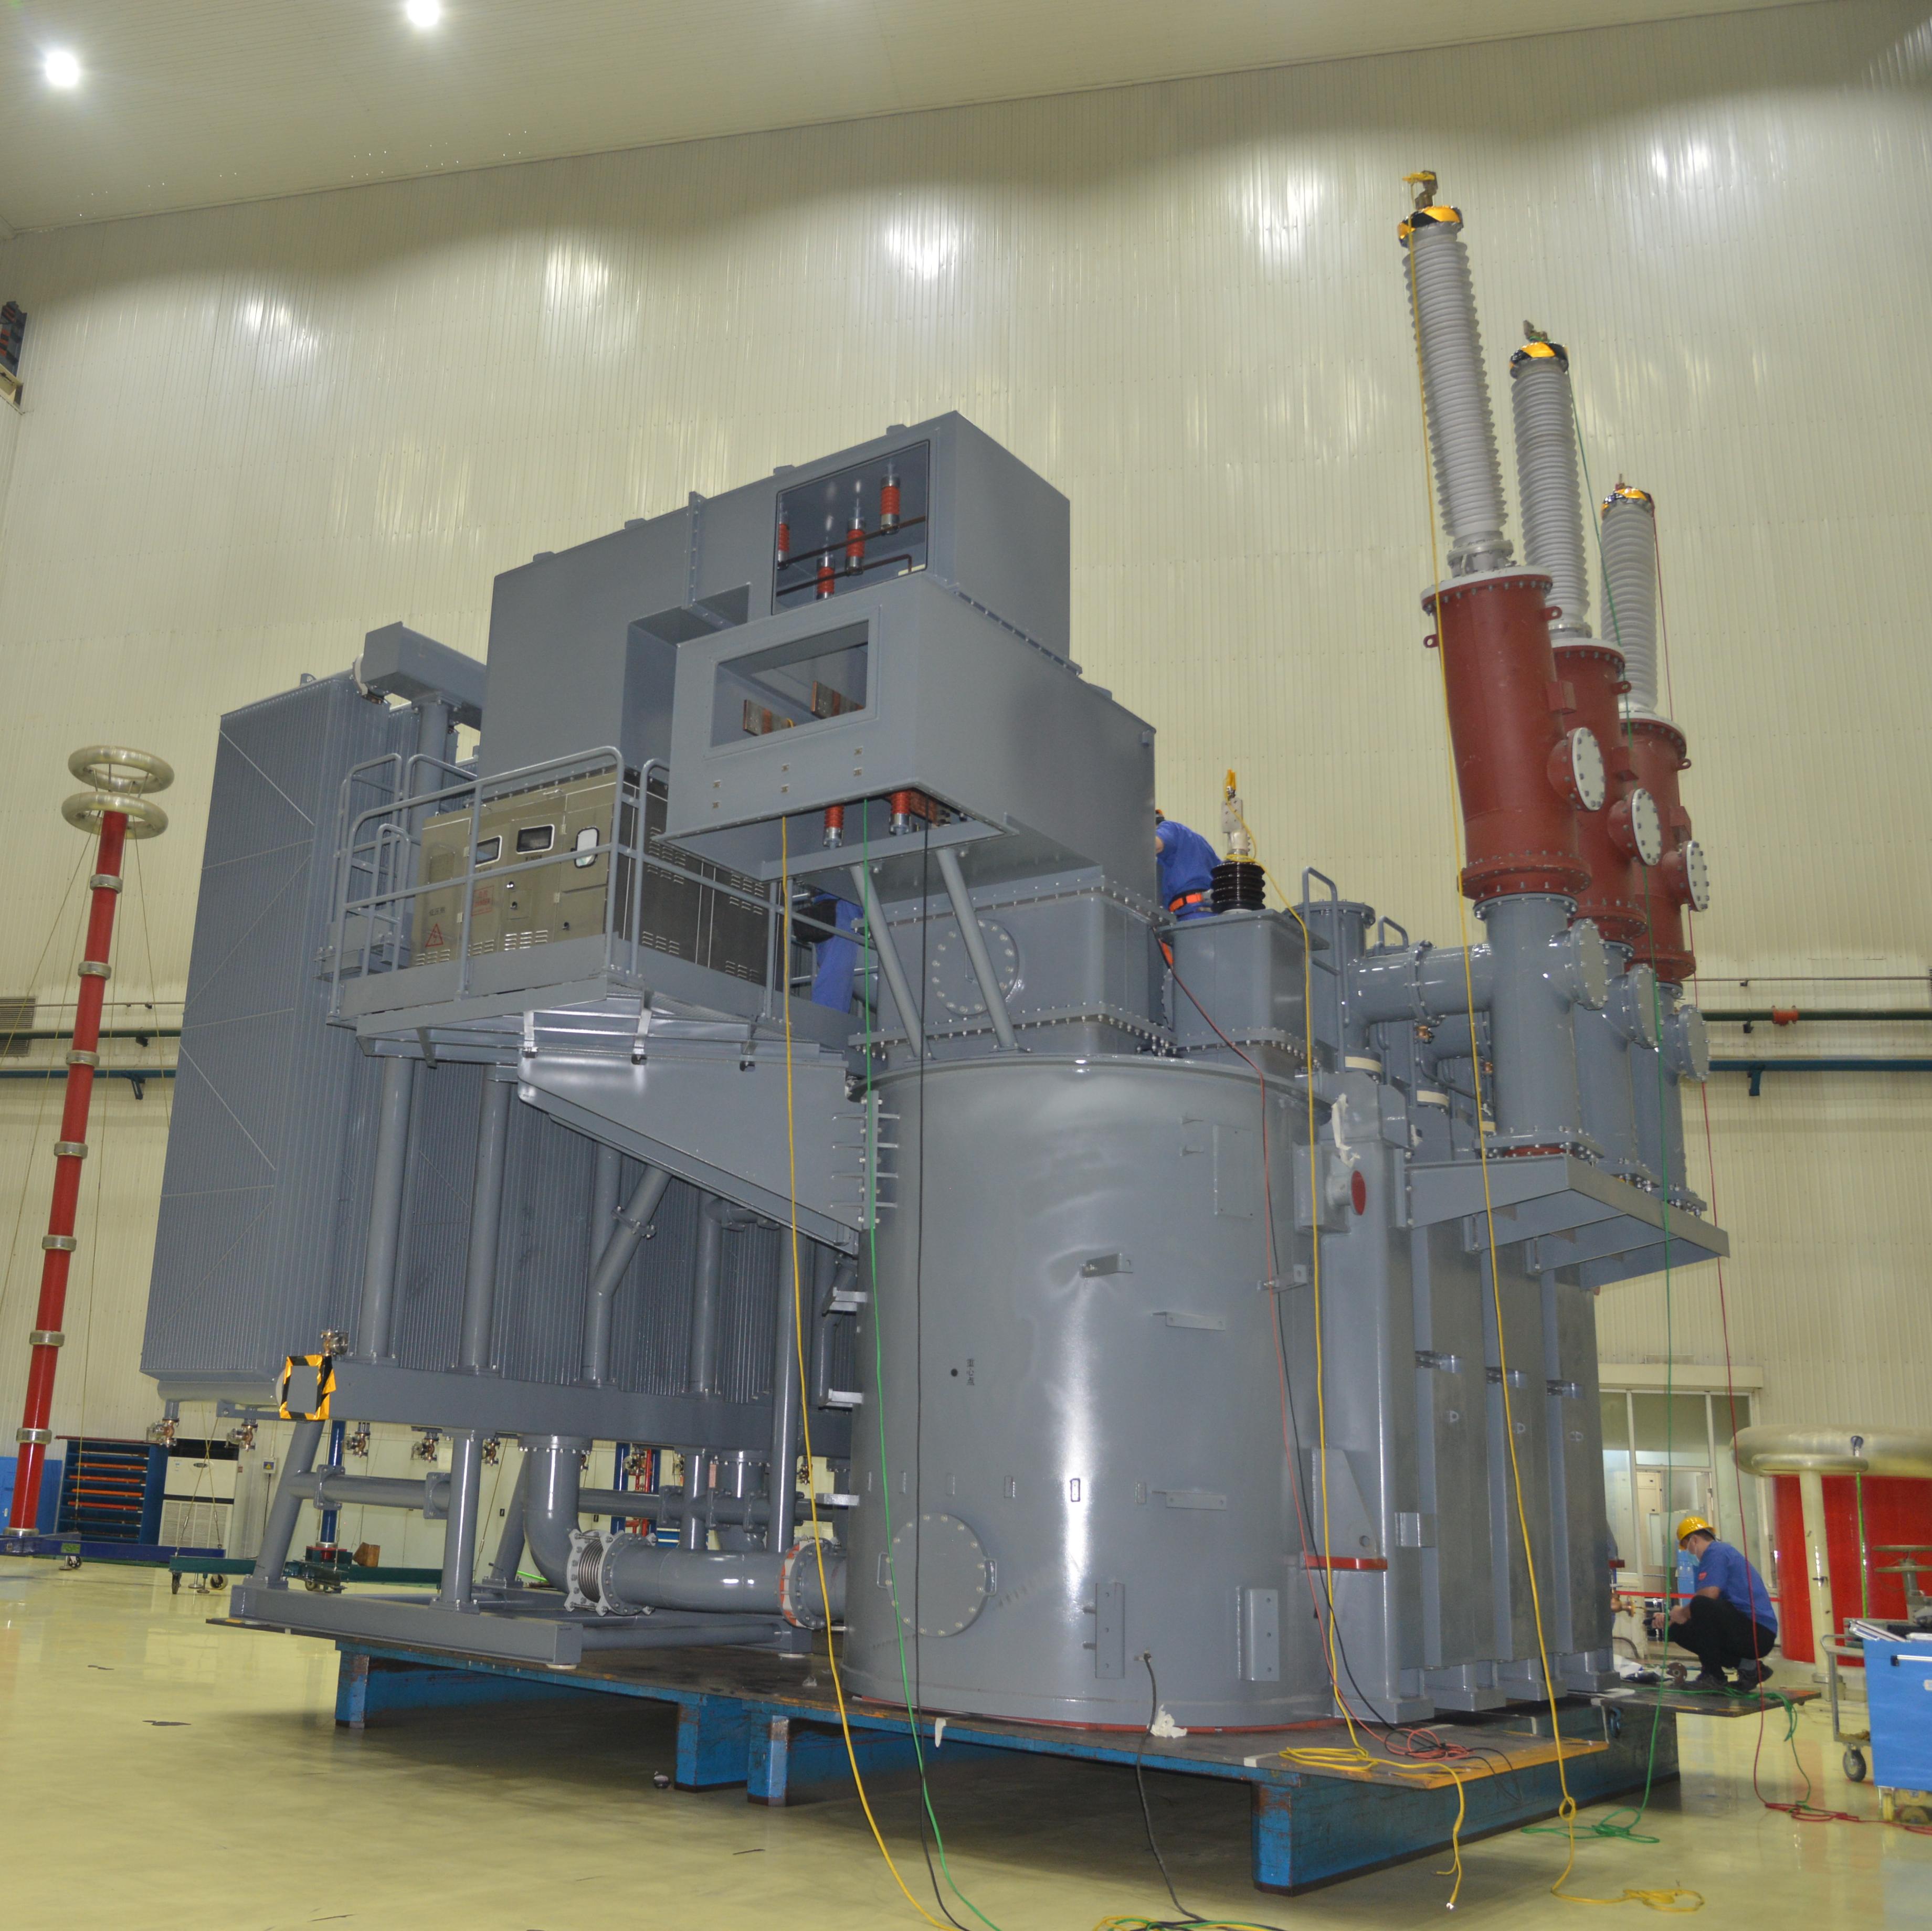 Baobian Electric's first gas-insulated transformer developed for Hong Kong passed the test